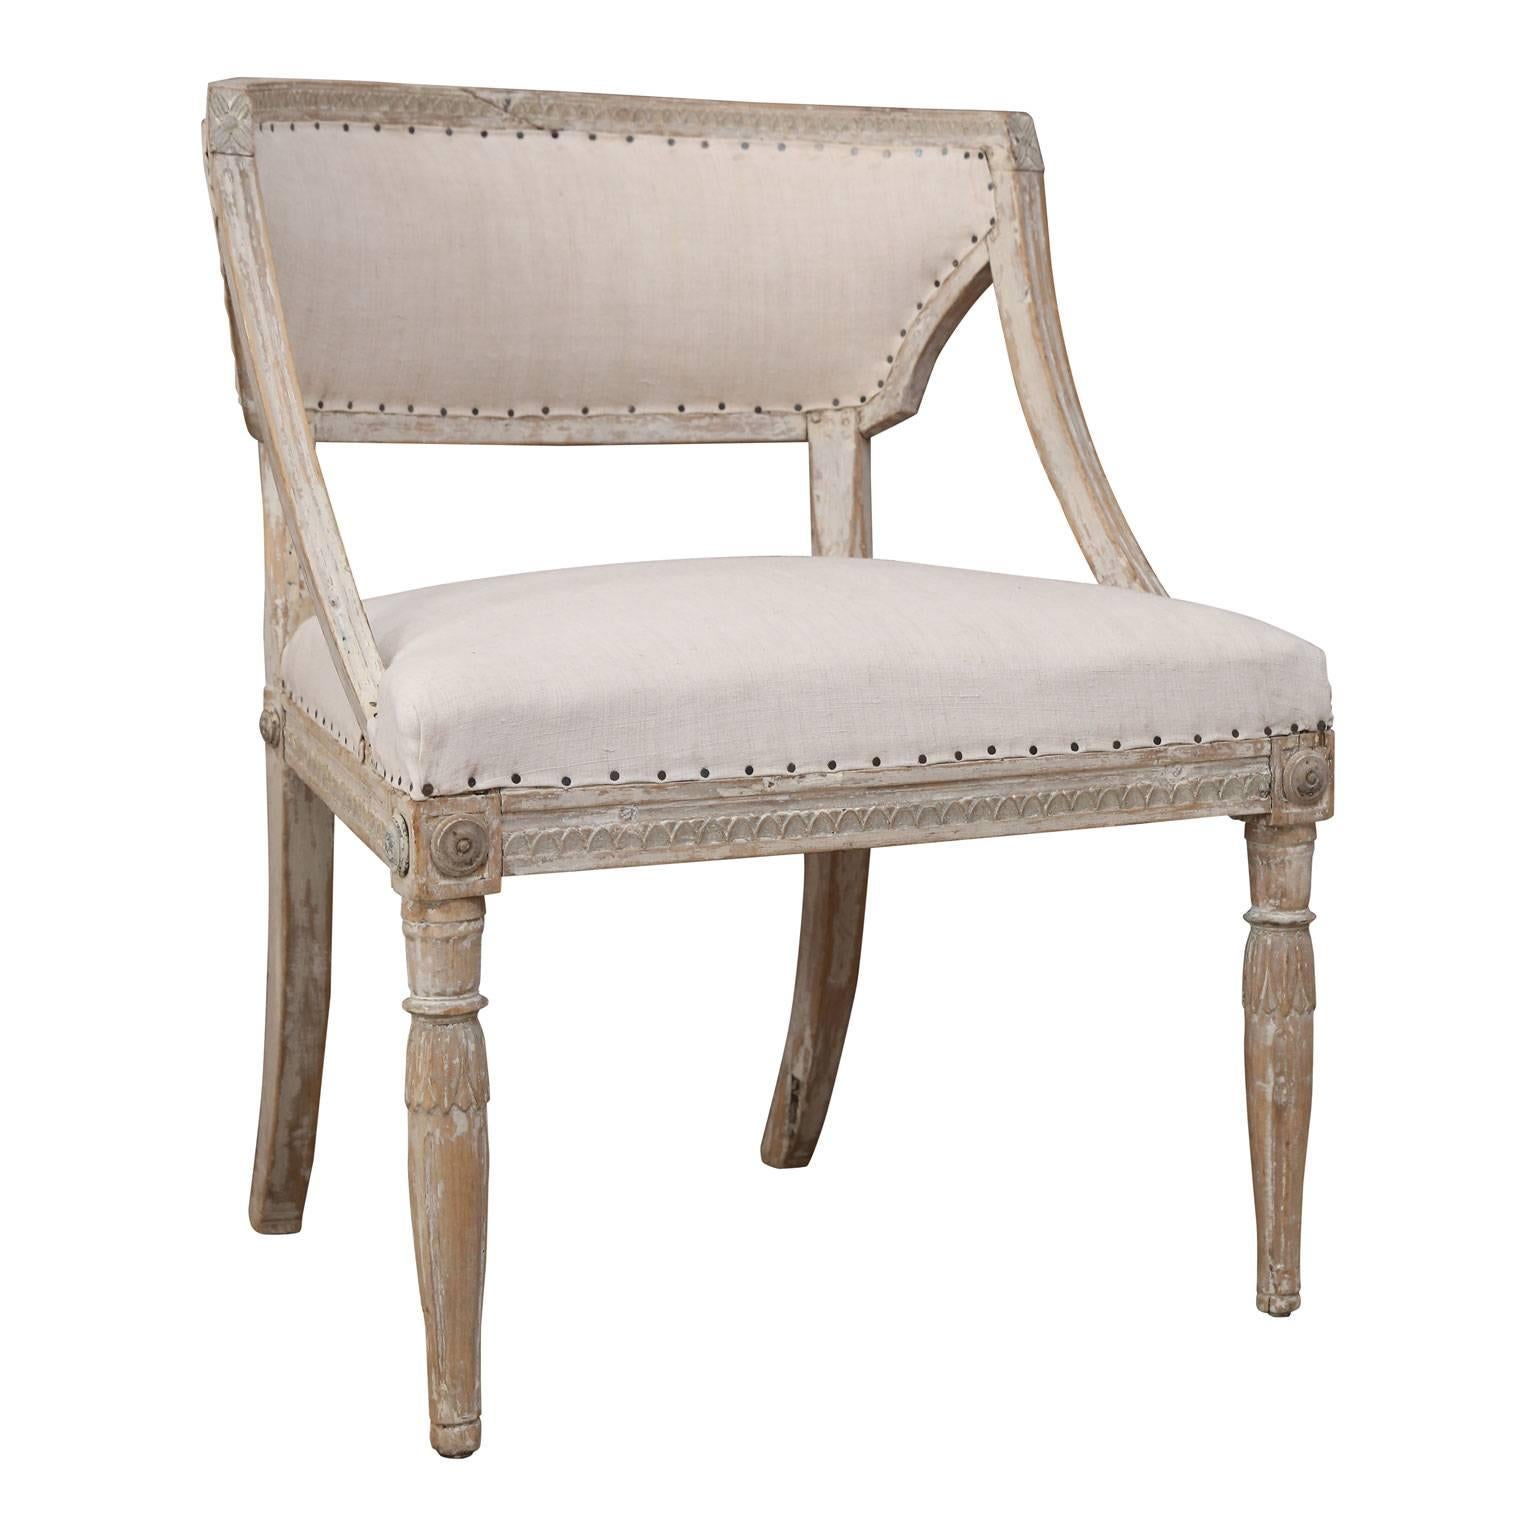 Pair of early 19th century Gustavian style barrel-back tub chairs from Sweden, in an attractive, scraped-back old paint finish and newly upholstered in linen. Carved lotus motif decoration adorns the back, apron and upper portions of the turned,